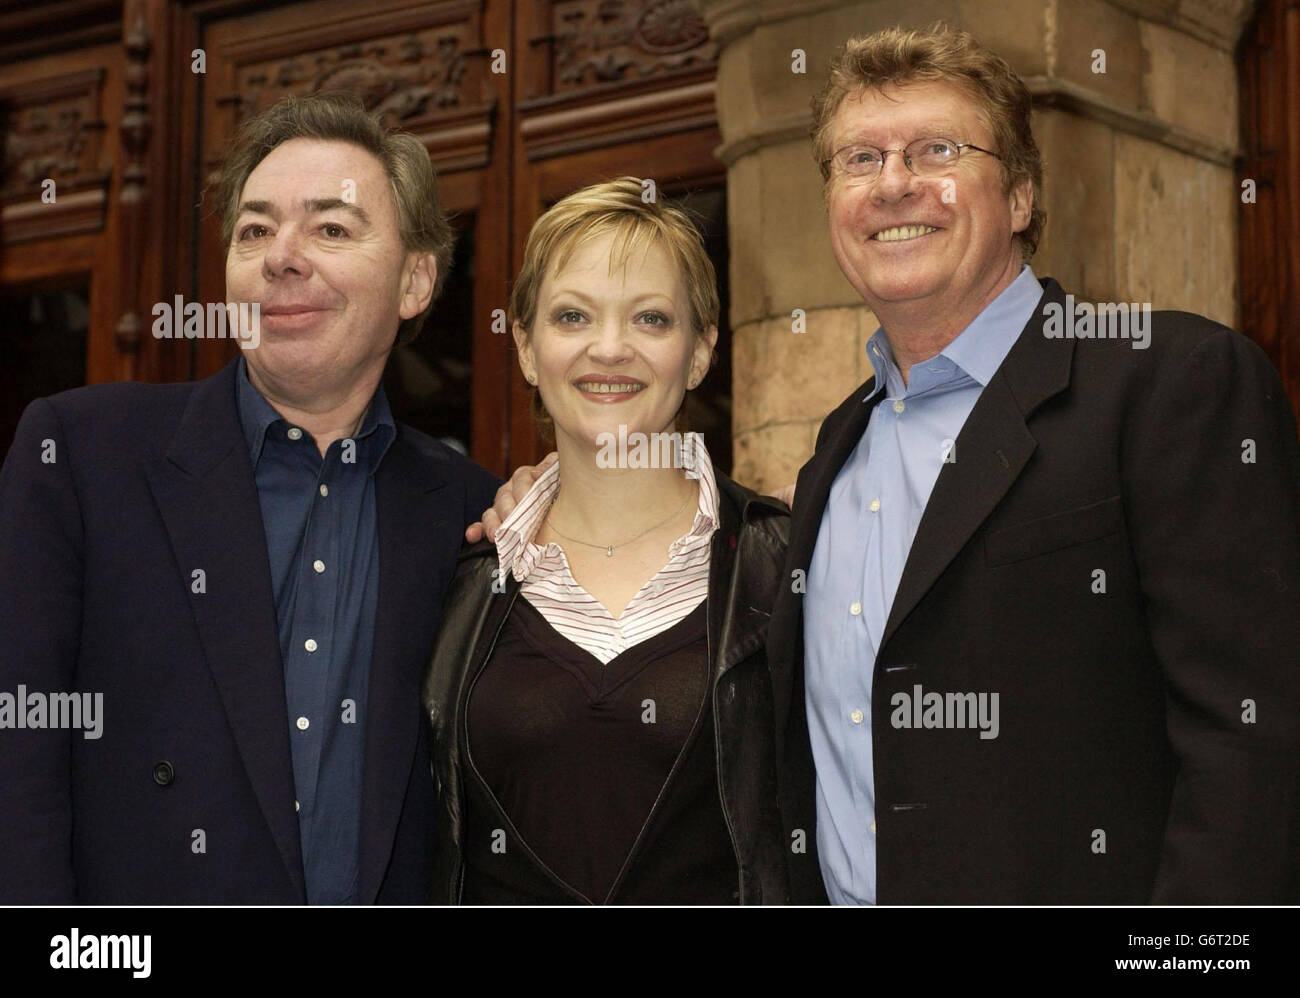 Andrew Lloyd Webber (left) with the two stars of his new musical 'The Woman in White', Maria Friedman and Michael Crawford, during a photocall at The Palace Theatre on Shaftsbury Avenue in central London. The Woman in White, directed by Trevor Nunn will open in the West End at the Palace Theatre on September 15. Stock Photo